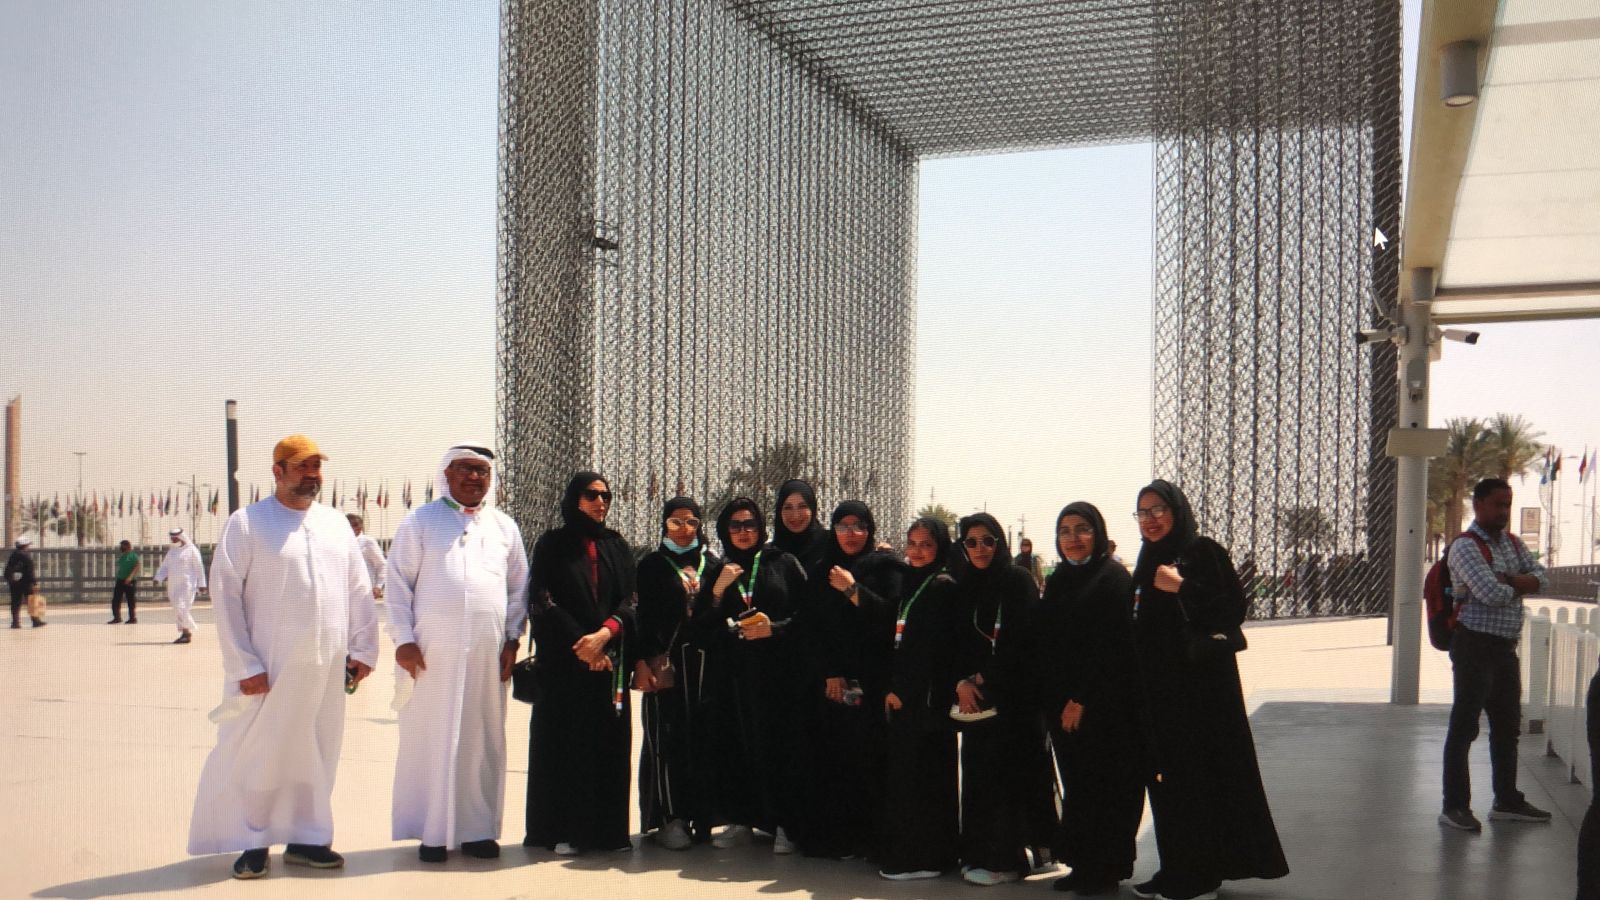 Celebrating Mother's Day and visiting Expo 2020 Dubai with Thalassemia patients